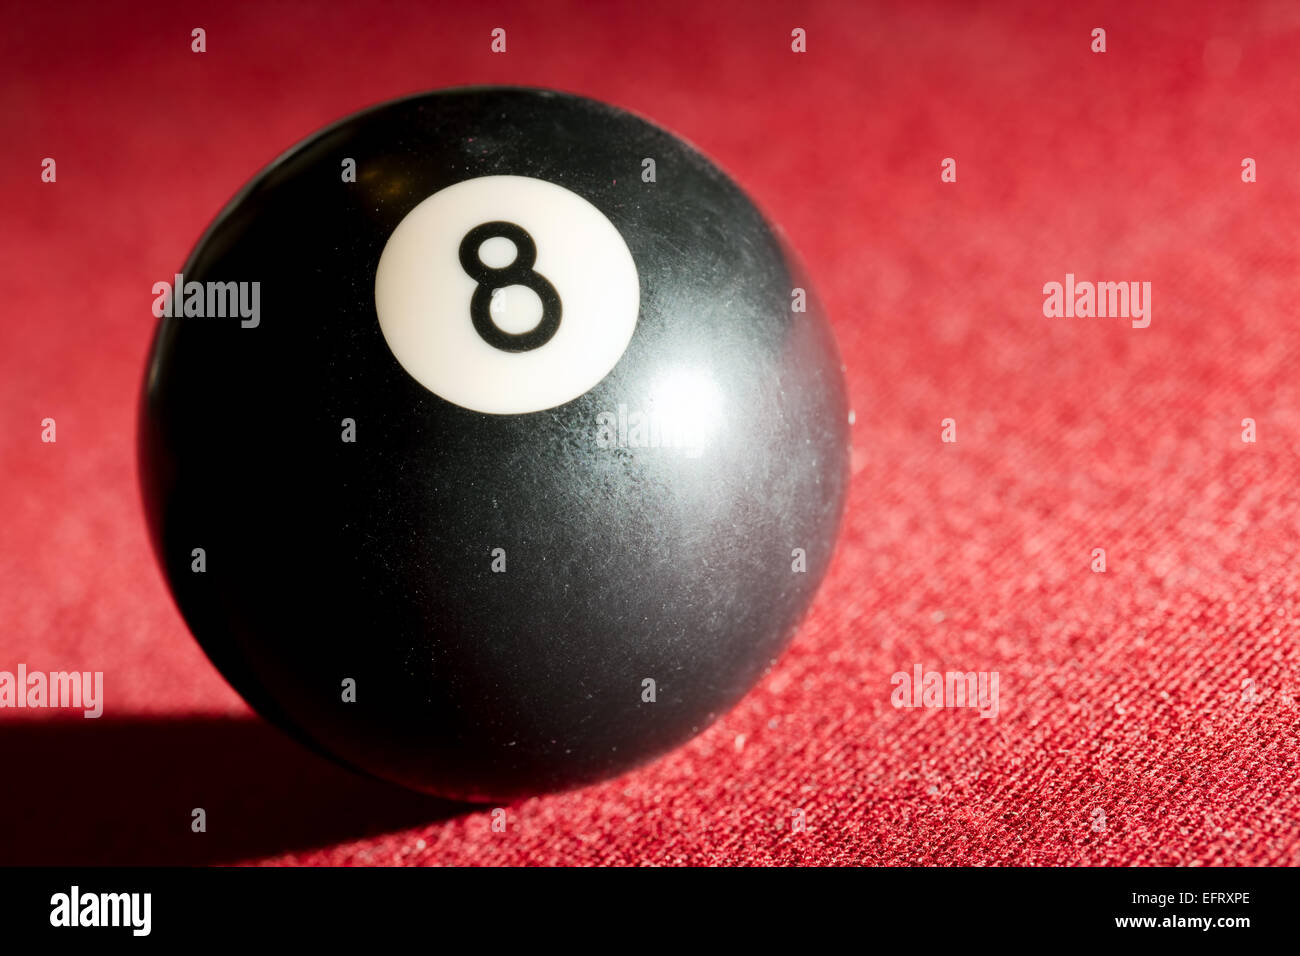 Billards pool or snooker game. The black eight ball. Red cloth table Stock Photo